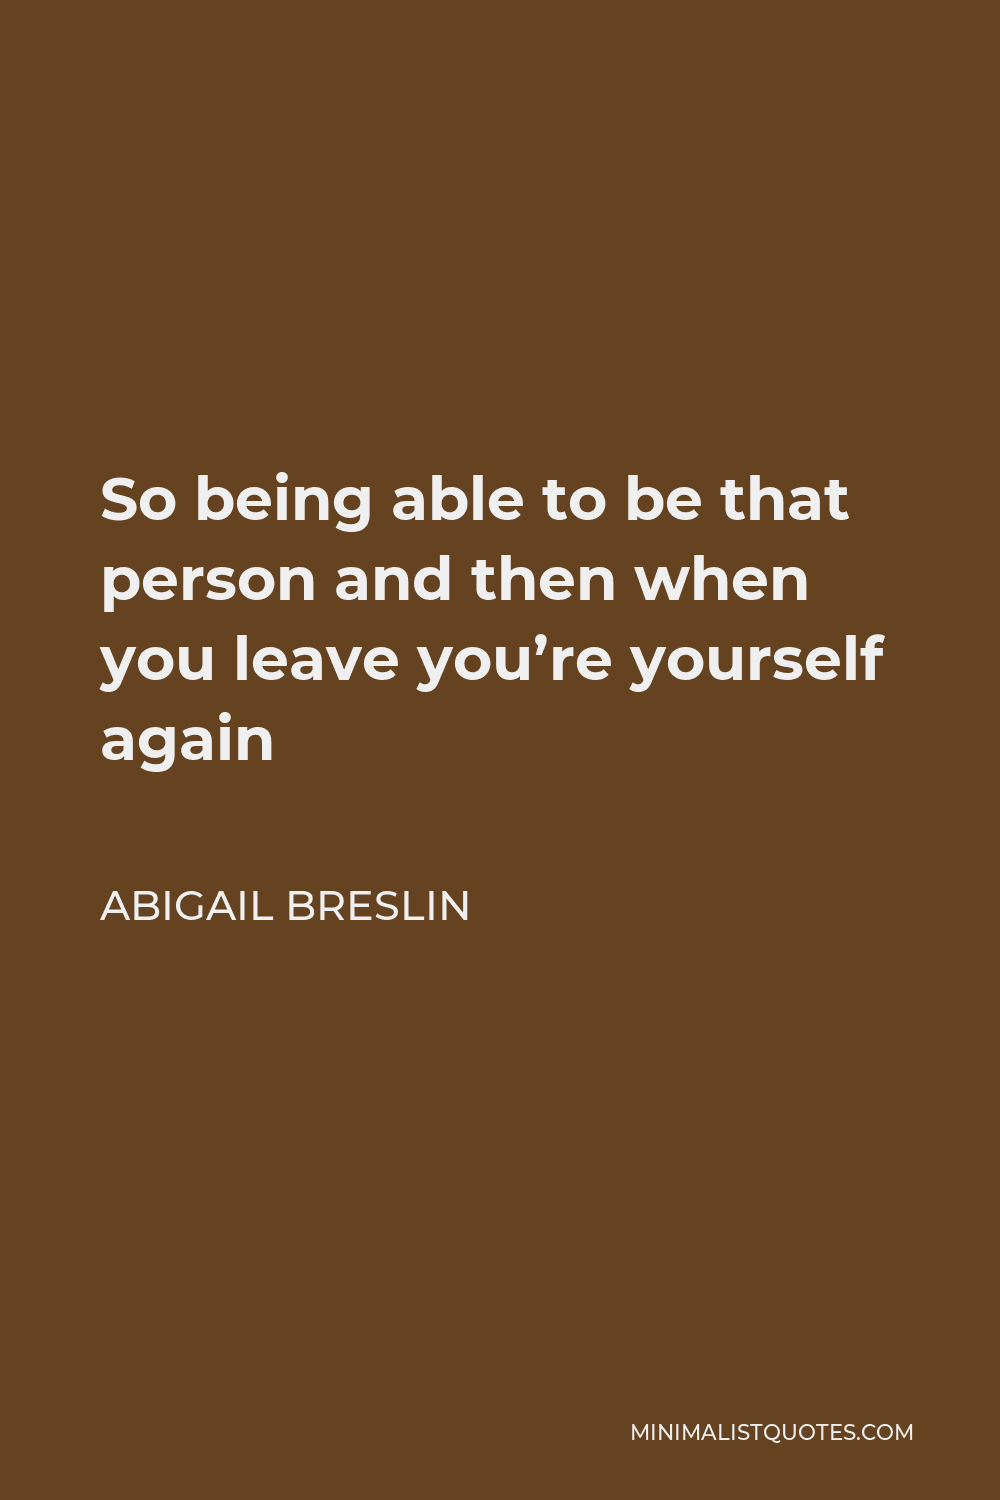 Abigail Breslin Quote - So being able to be that person and then when you leave you’re yourself again